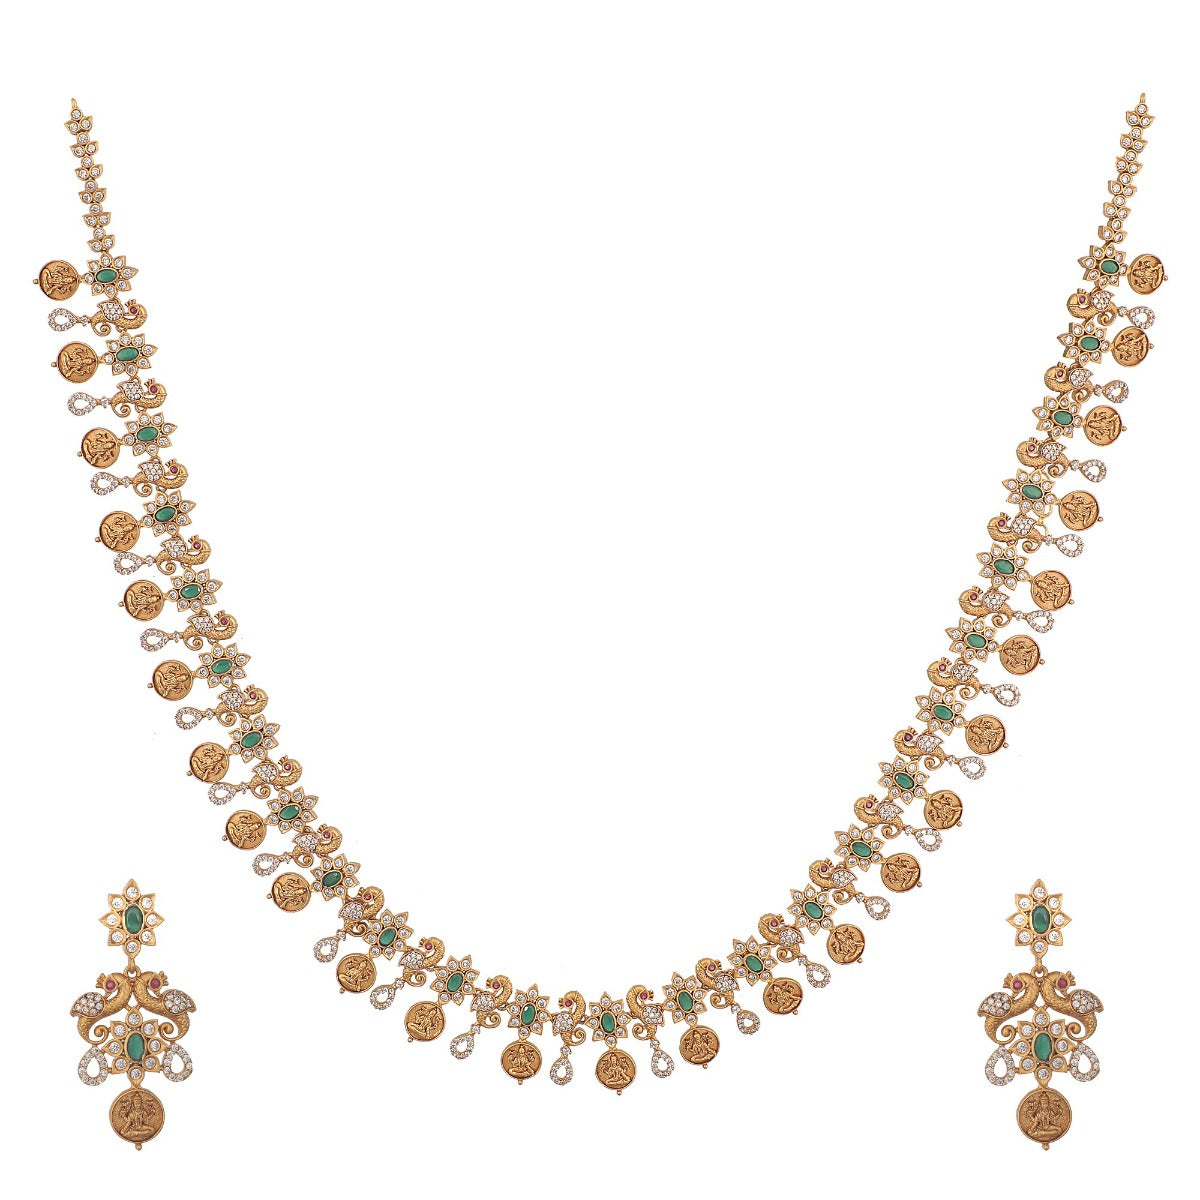 Antique Gold Plated Uzmi Long Necklace Earring Set